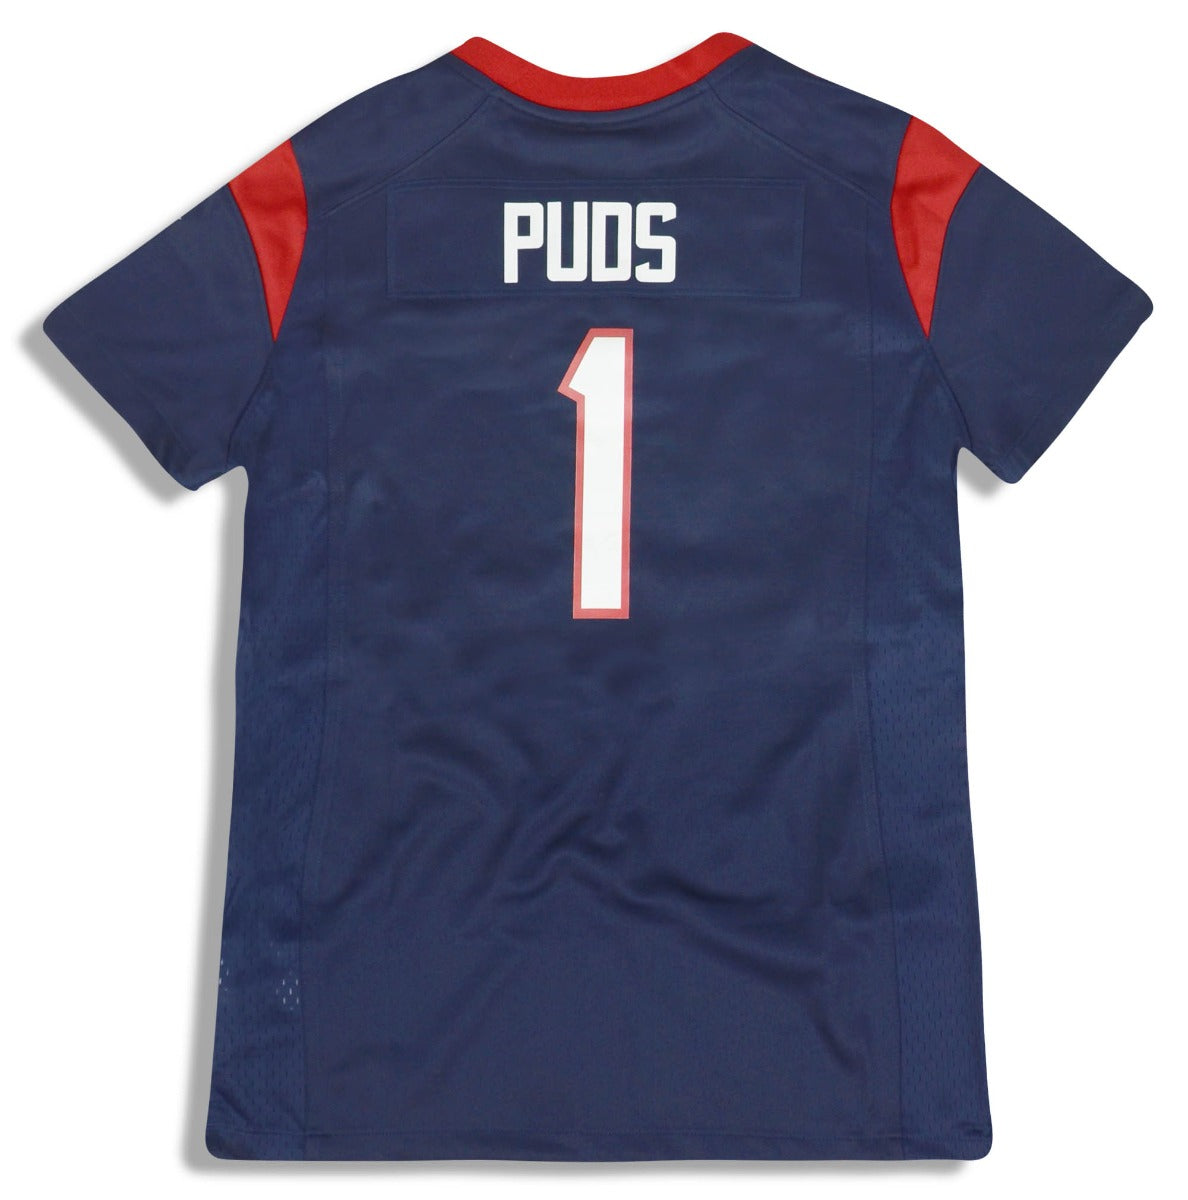 2018 HOUSTON TEXANS PUDS #1 NIKE GAME JERSEY (HOME) WOMENS (M) - W/TAGS